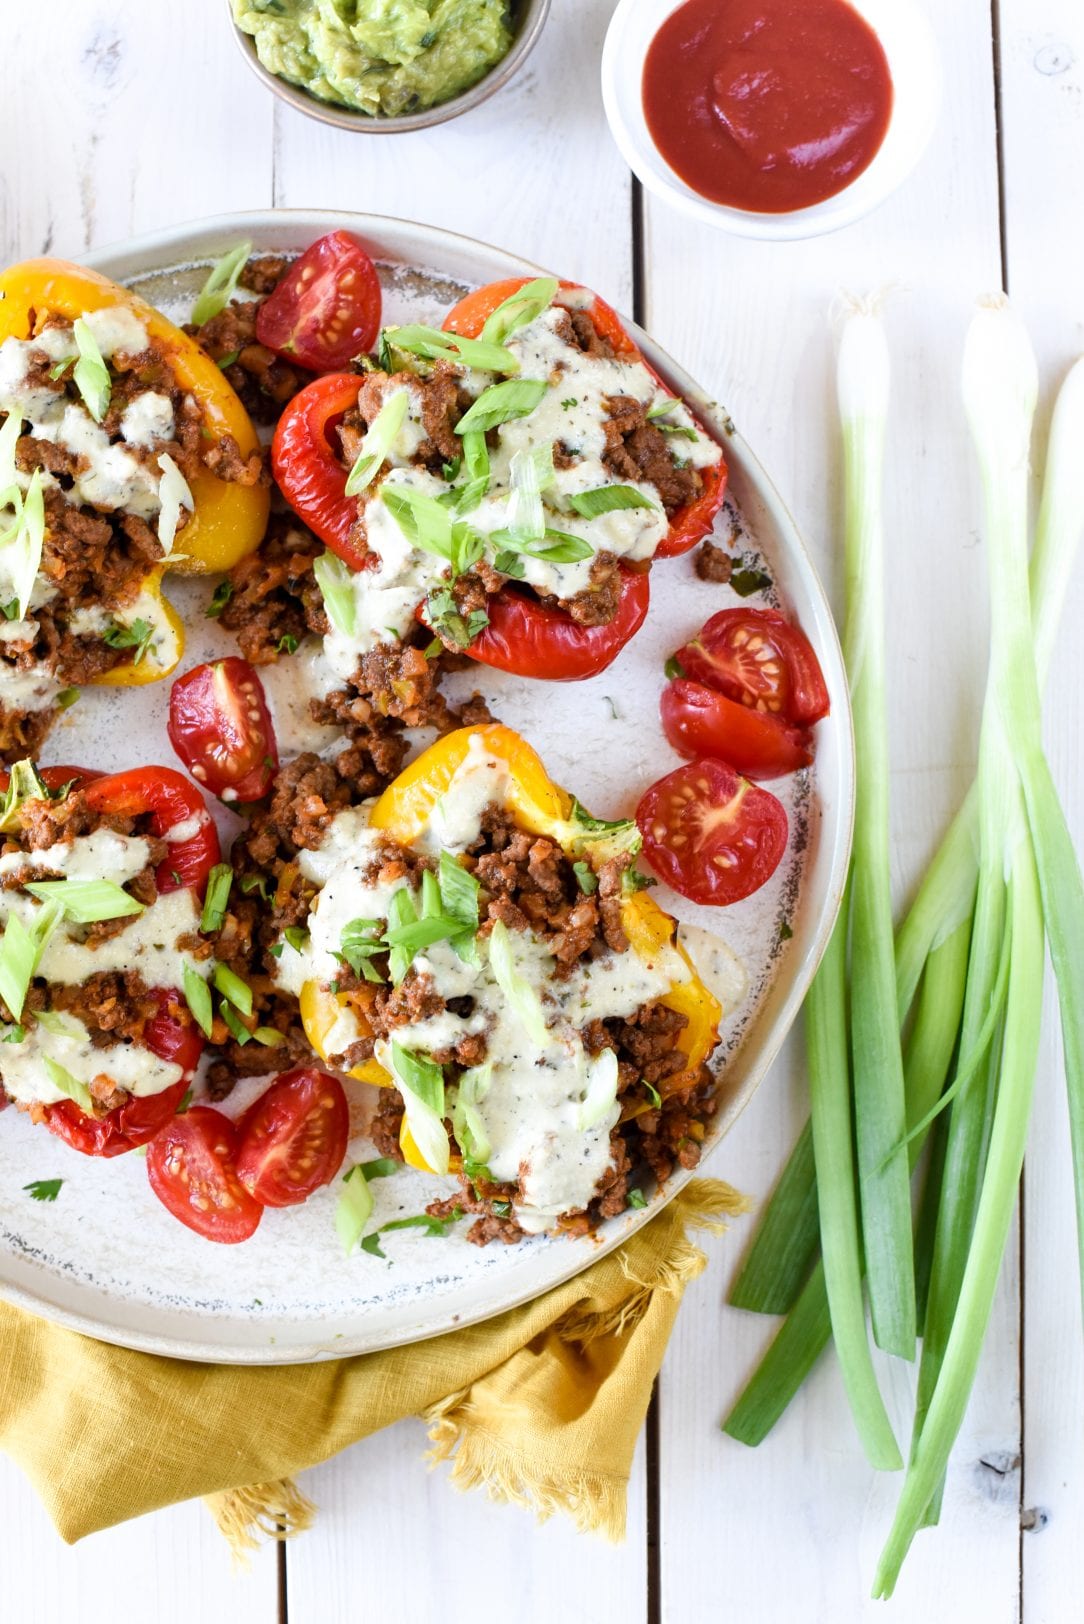 Healthy Whole30 Stuffed Peppers with Avocado Cashew Sauce